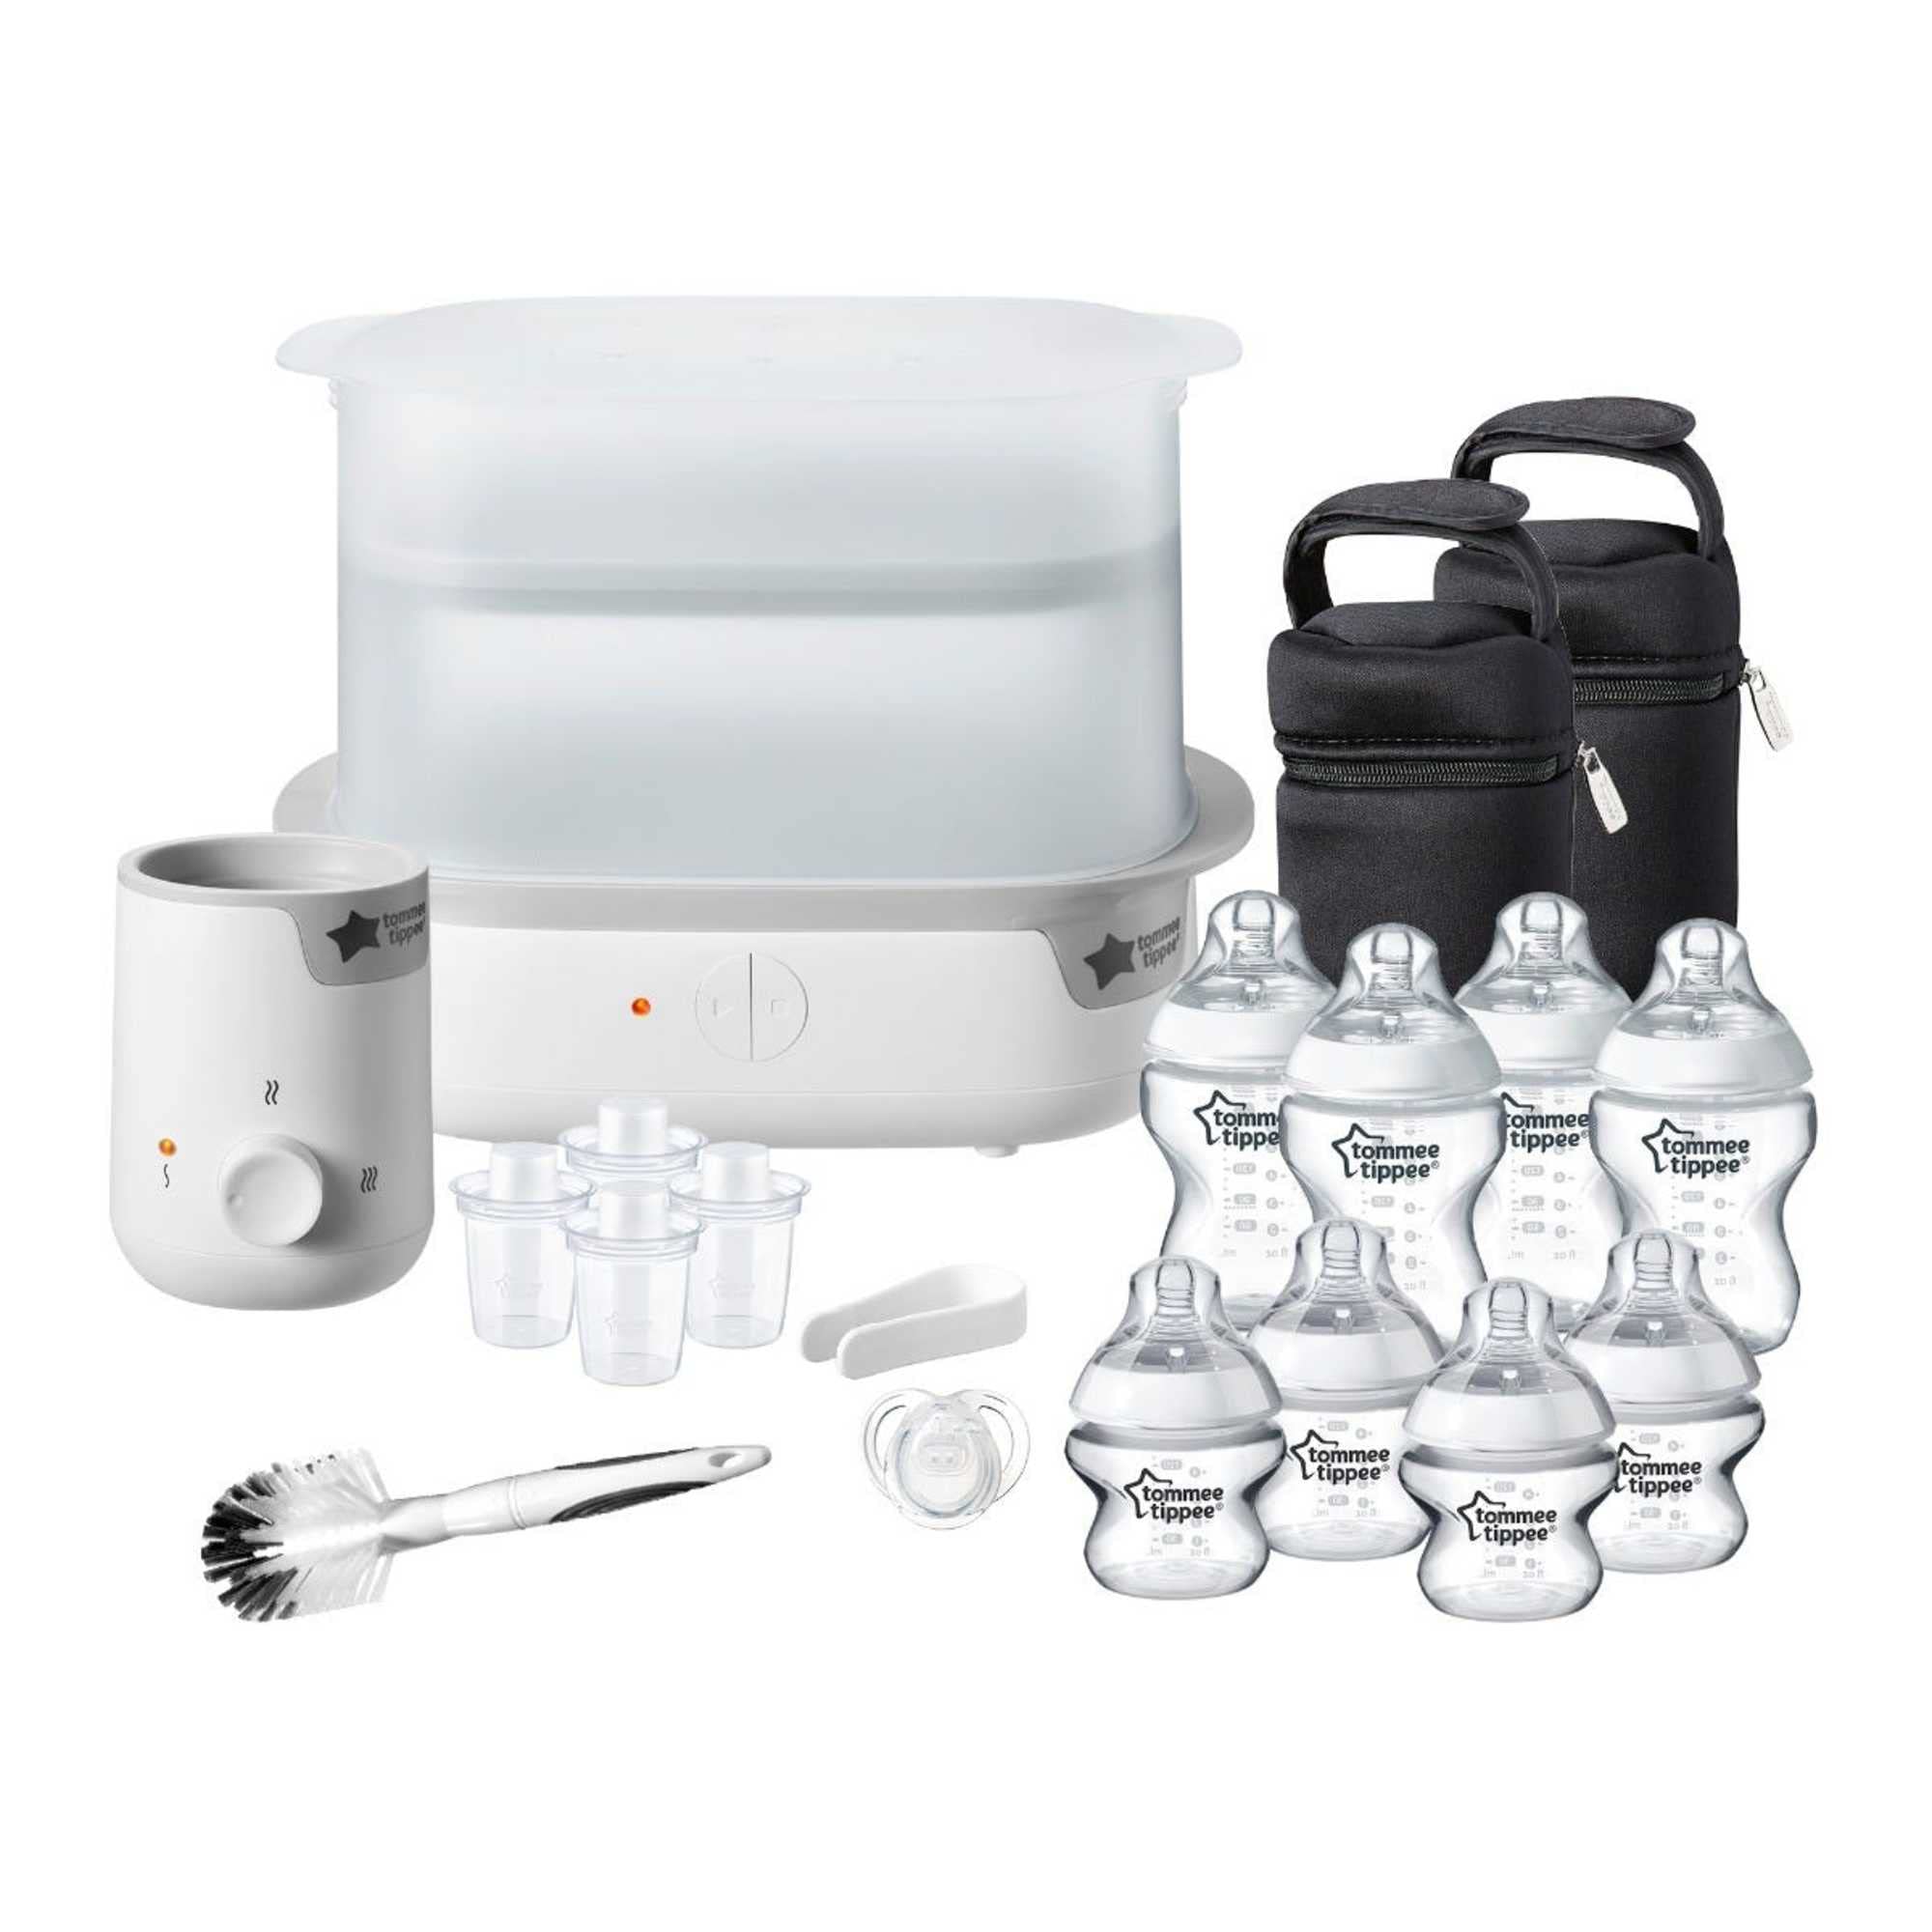 Tommee Tippee Complete Feeding Set, Super-Steam Electric Steriliser, Baby Bottle and Food Warmer, Baby Bottles and Accessories, White